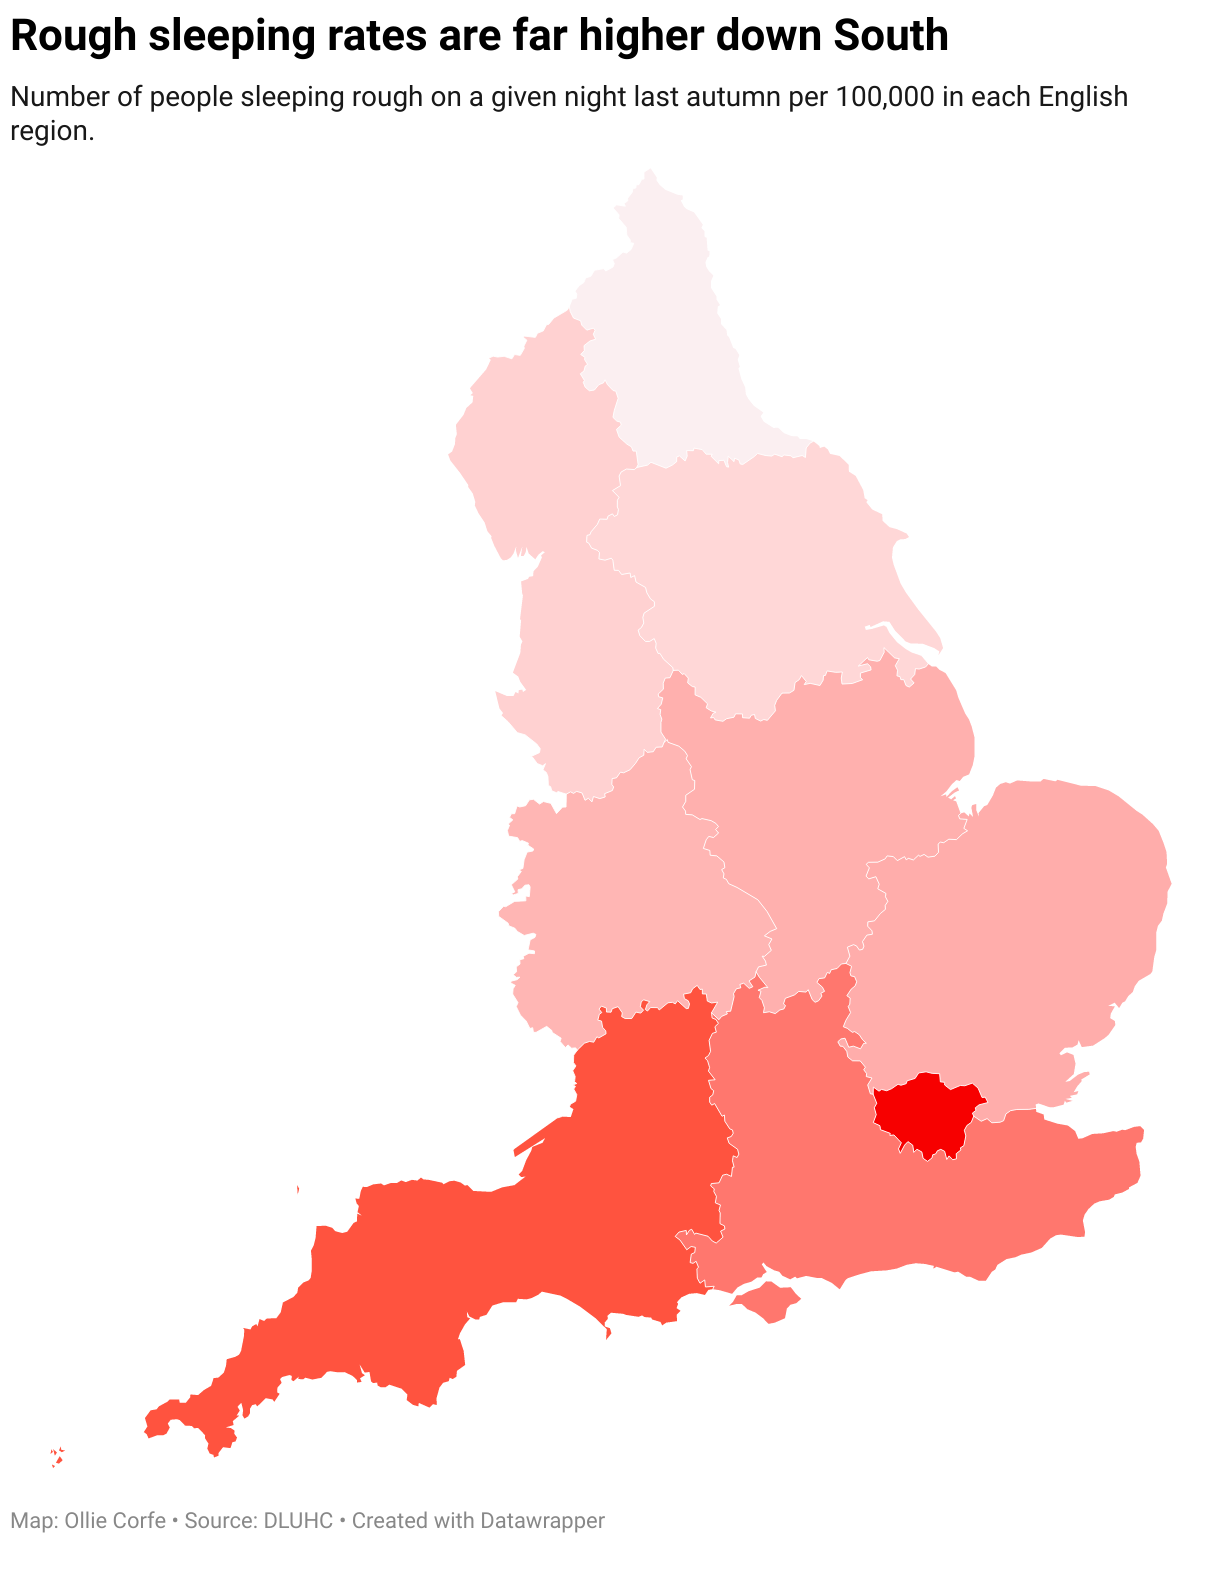 Map of English regions by homelessness rates.